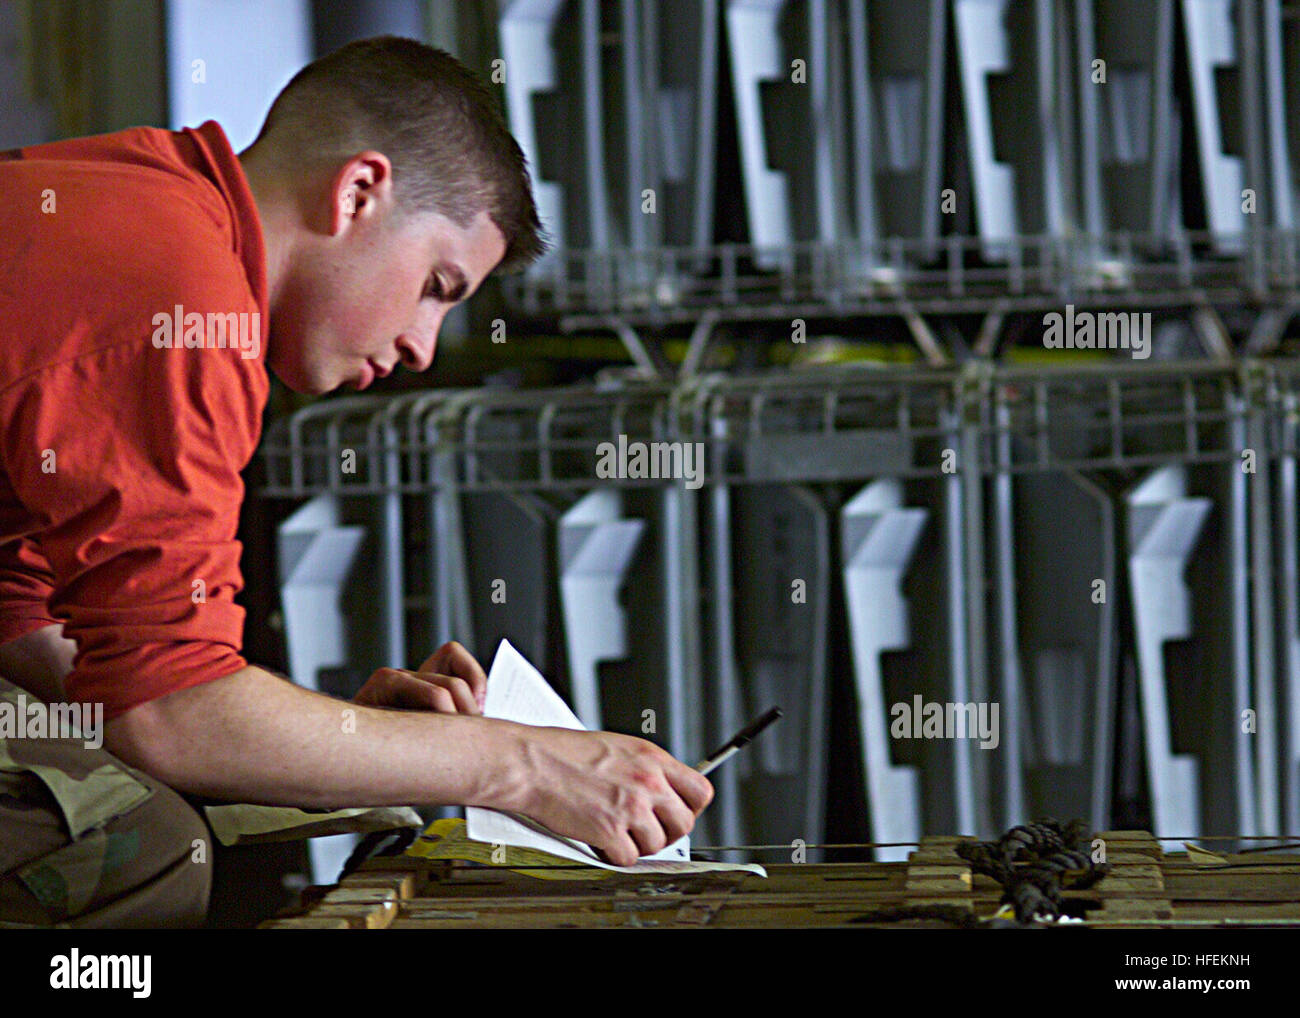 030429-N-2819P-023 The Arabian Gulf (Apr. 29, 2003) -- Aviation Ordnanceman Airman James Whitney inventories ammunition during an ammunition onload between the amphibious warfare ship USS Kearsarge (LHD 3) and the Ready Reserve Force Modular Cargo Delivery System ship SS Cape John (T-AK 5022).  The Kearsarge is deployed conducting combat missions in support of Operation Iraqi Freedom, the multi-national coalition effort to liberate the Iraqi people, eliminate Iraq's weapons of mass destruction, and end the regime of Saddam Hussein.  U.S. Navy photo by Photographer's Mate 3rd Class Jose E. Ponc Stock Photo